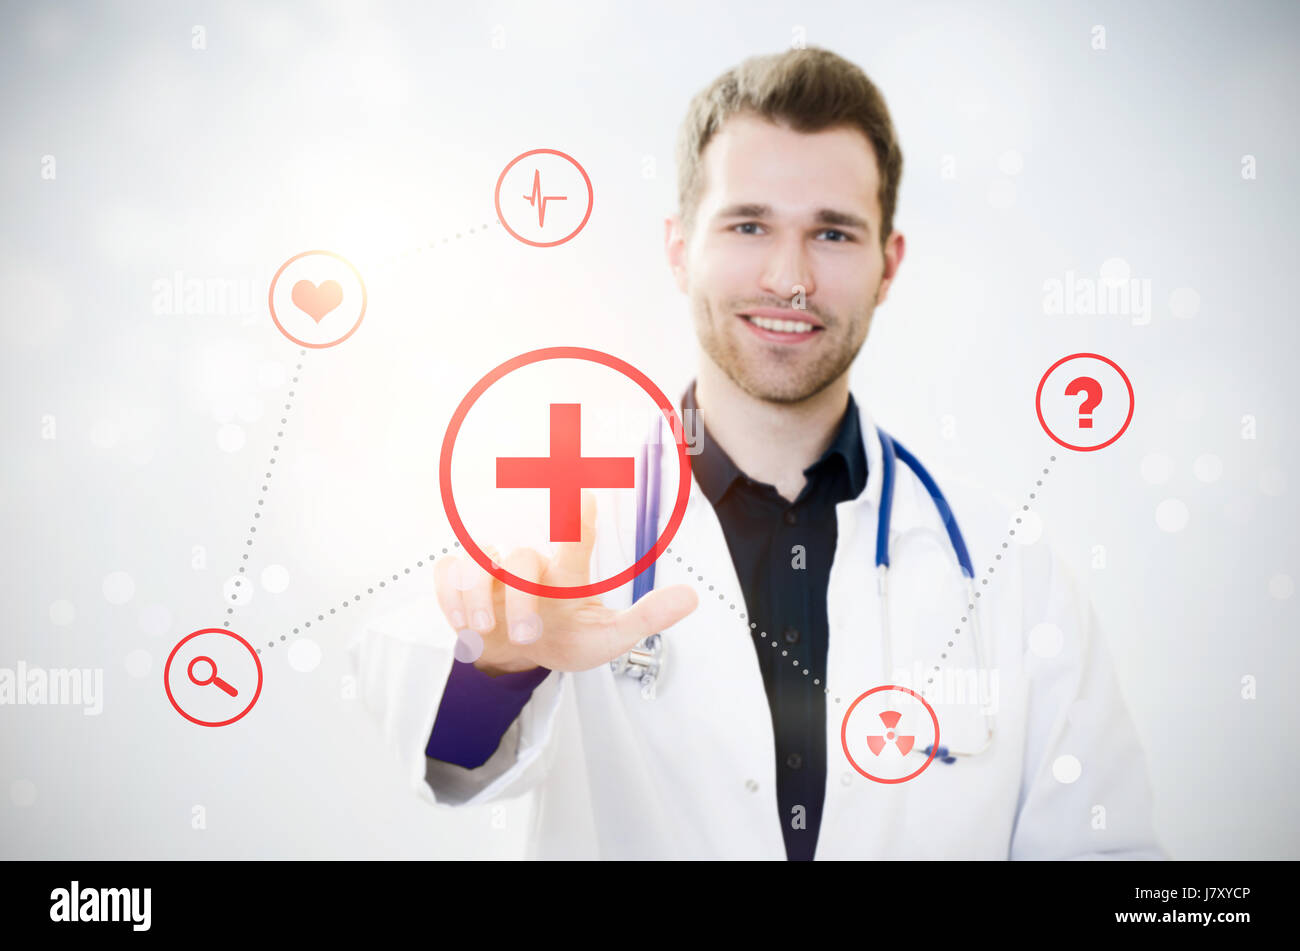 Doctor touching screen with icons. Futuristic medicine. Doctor medical technology icon healthcare screen touching data concept Stock Photo